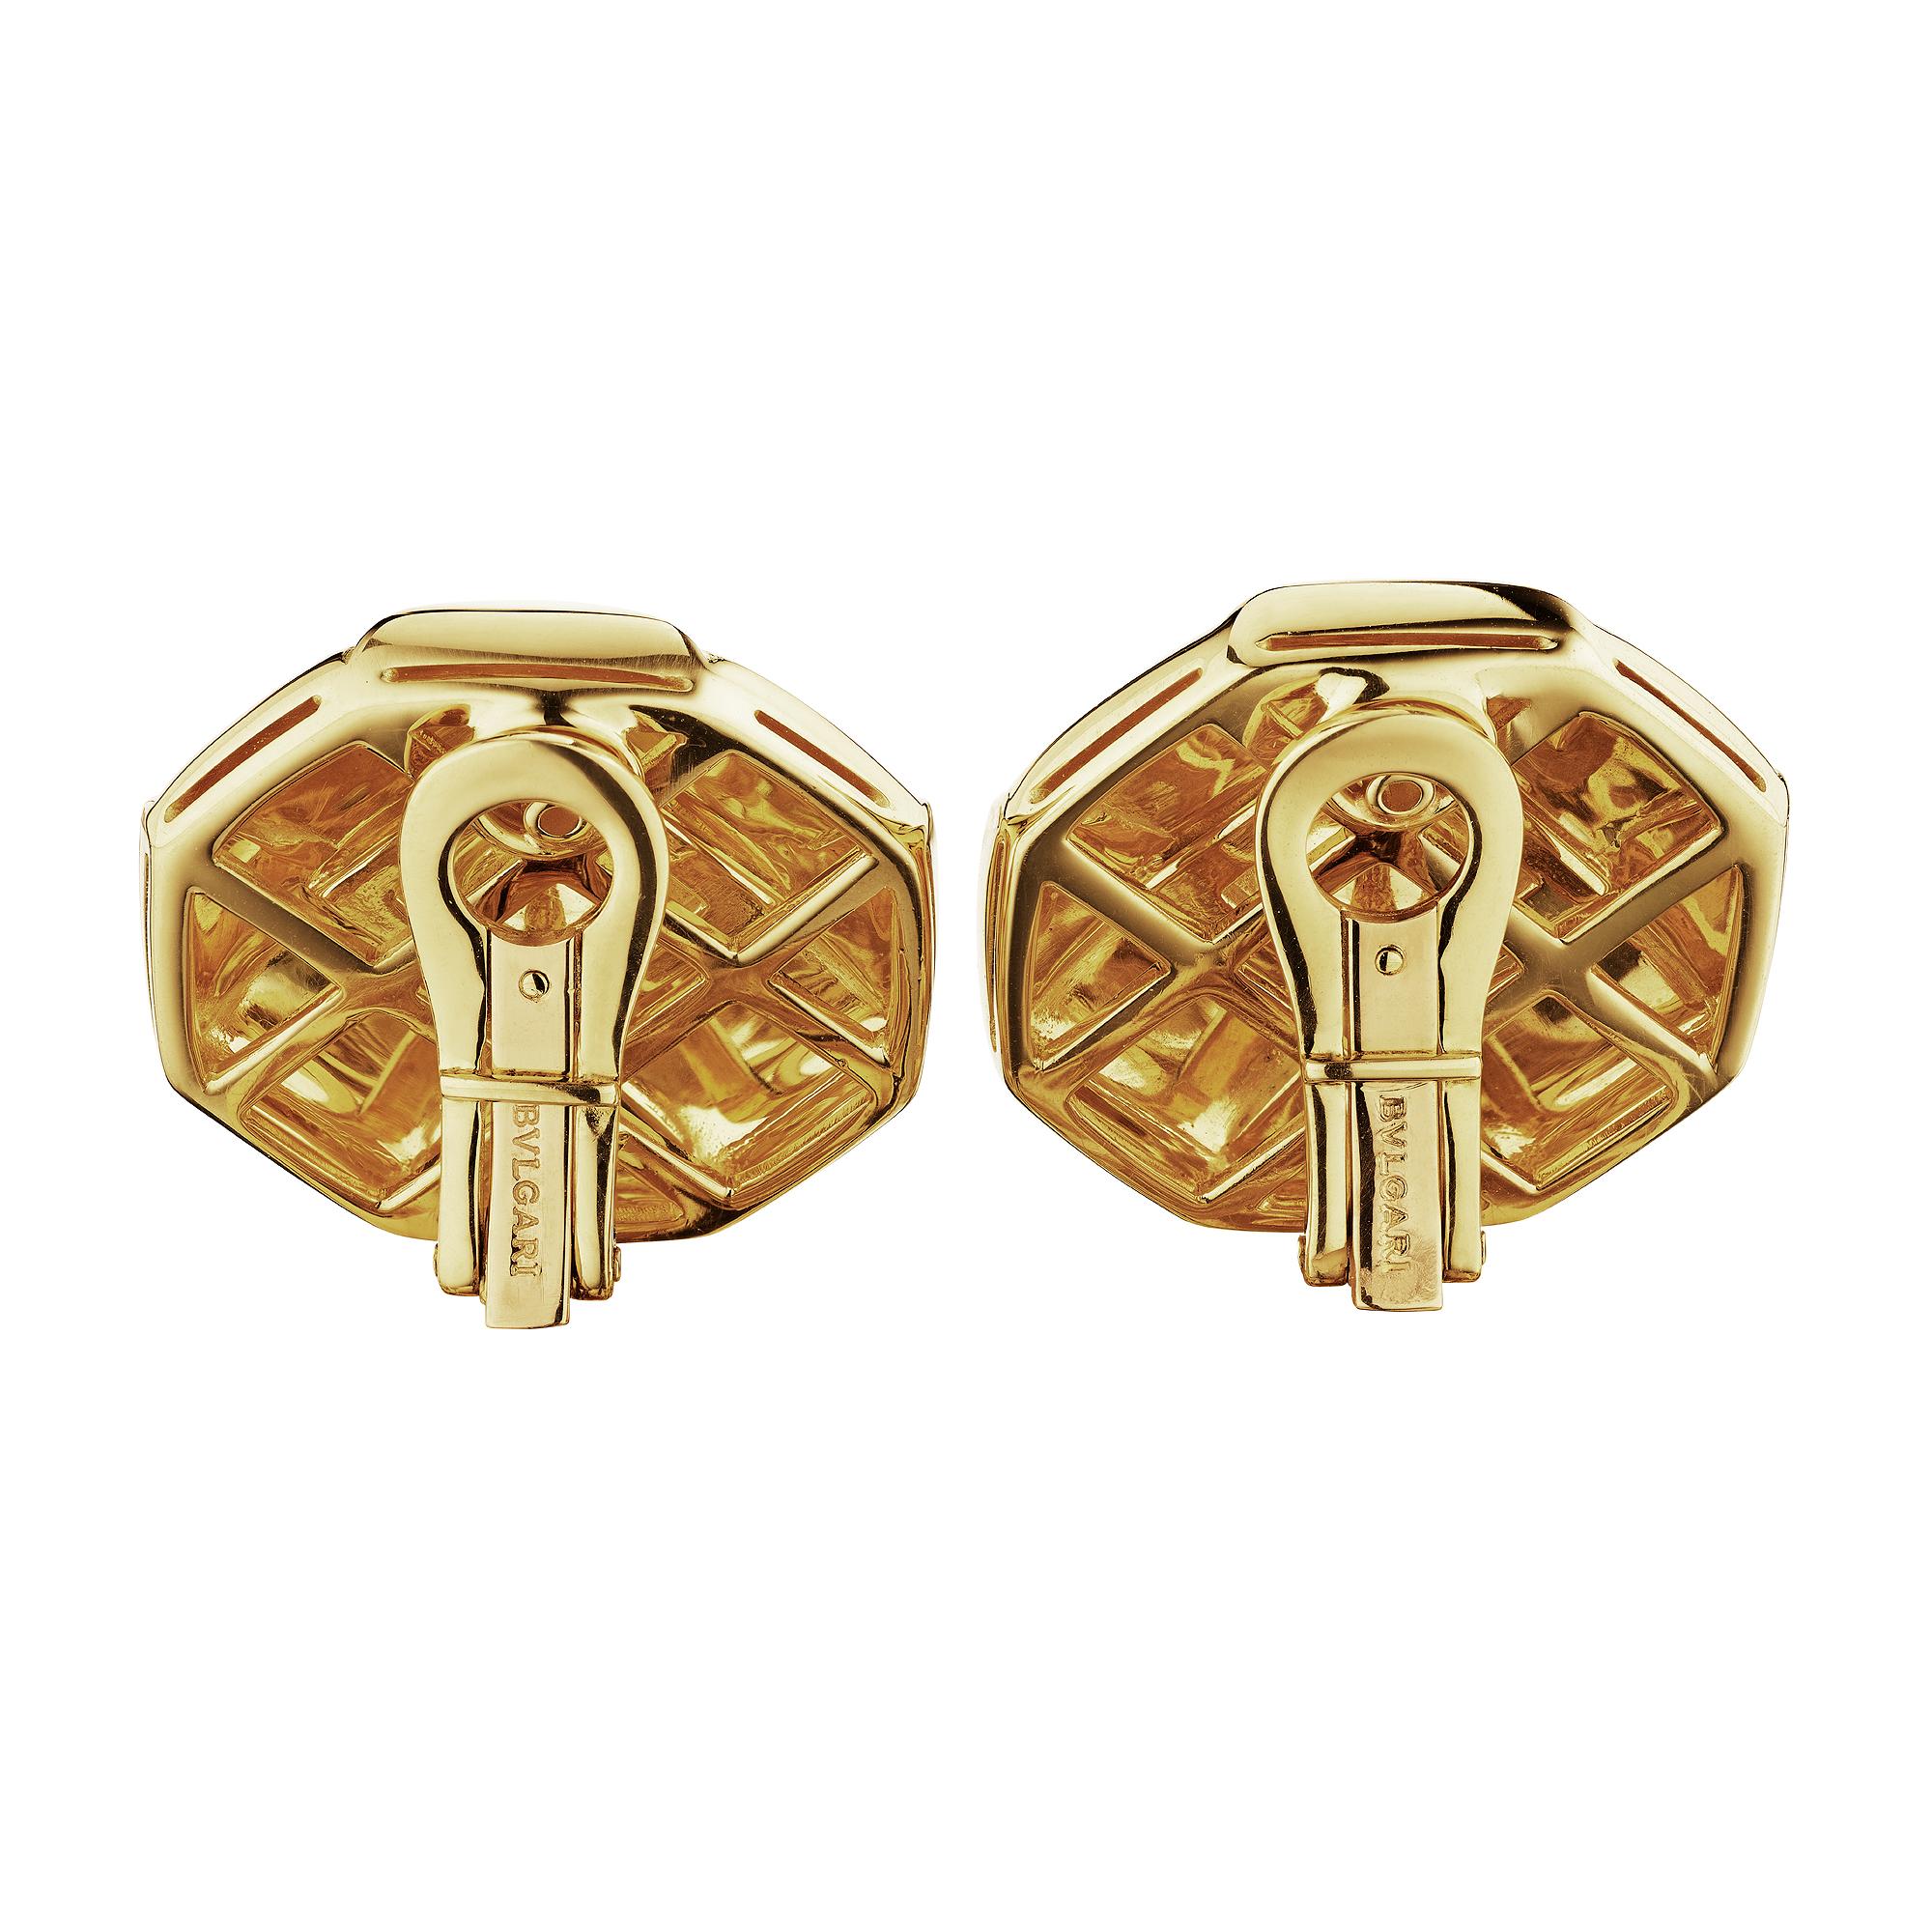 Bulgari Modernist Quilted Gold Button Clip Earrings In Excellent Condition For Sale In Greenwich, CT